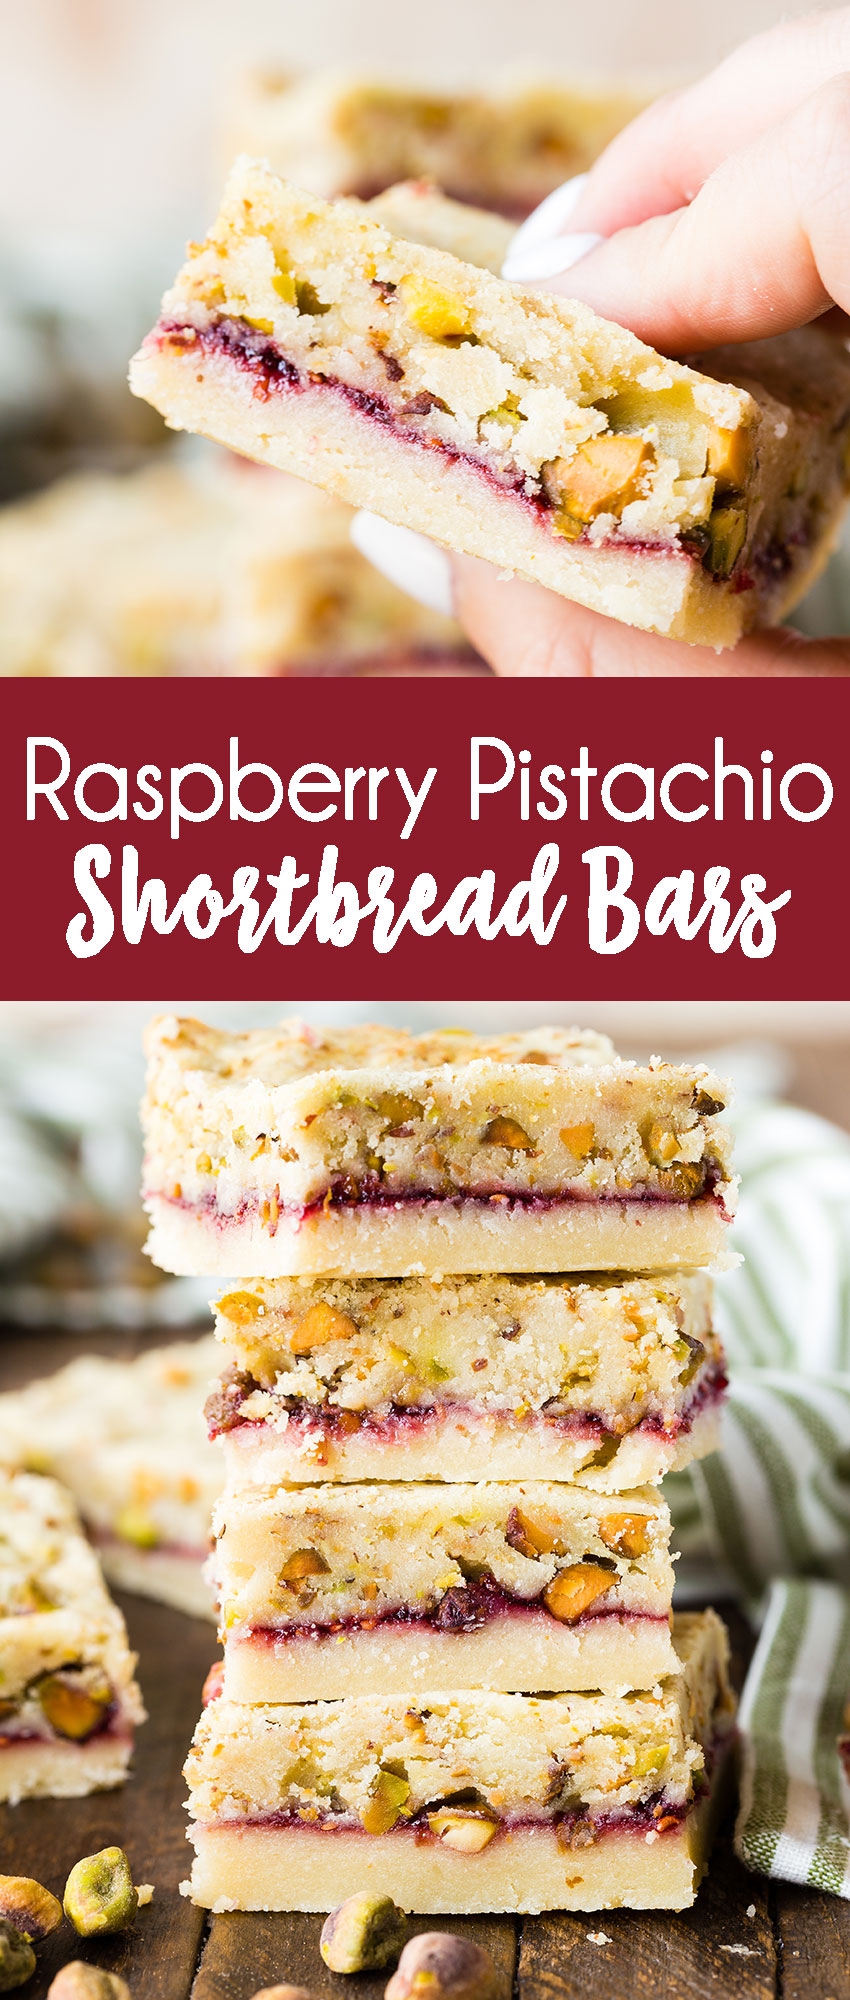 Buttery shortbread with a jam and pistachio layer, to make a cookie bar